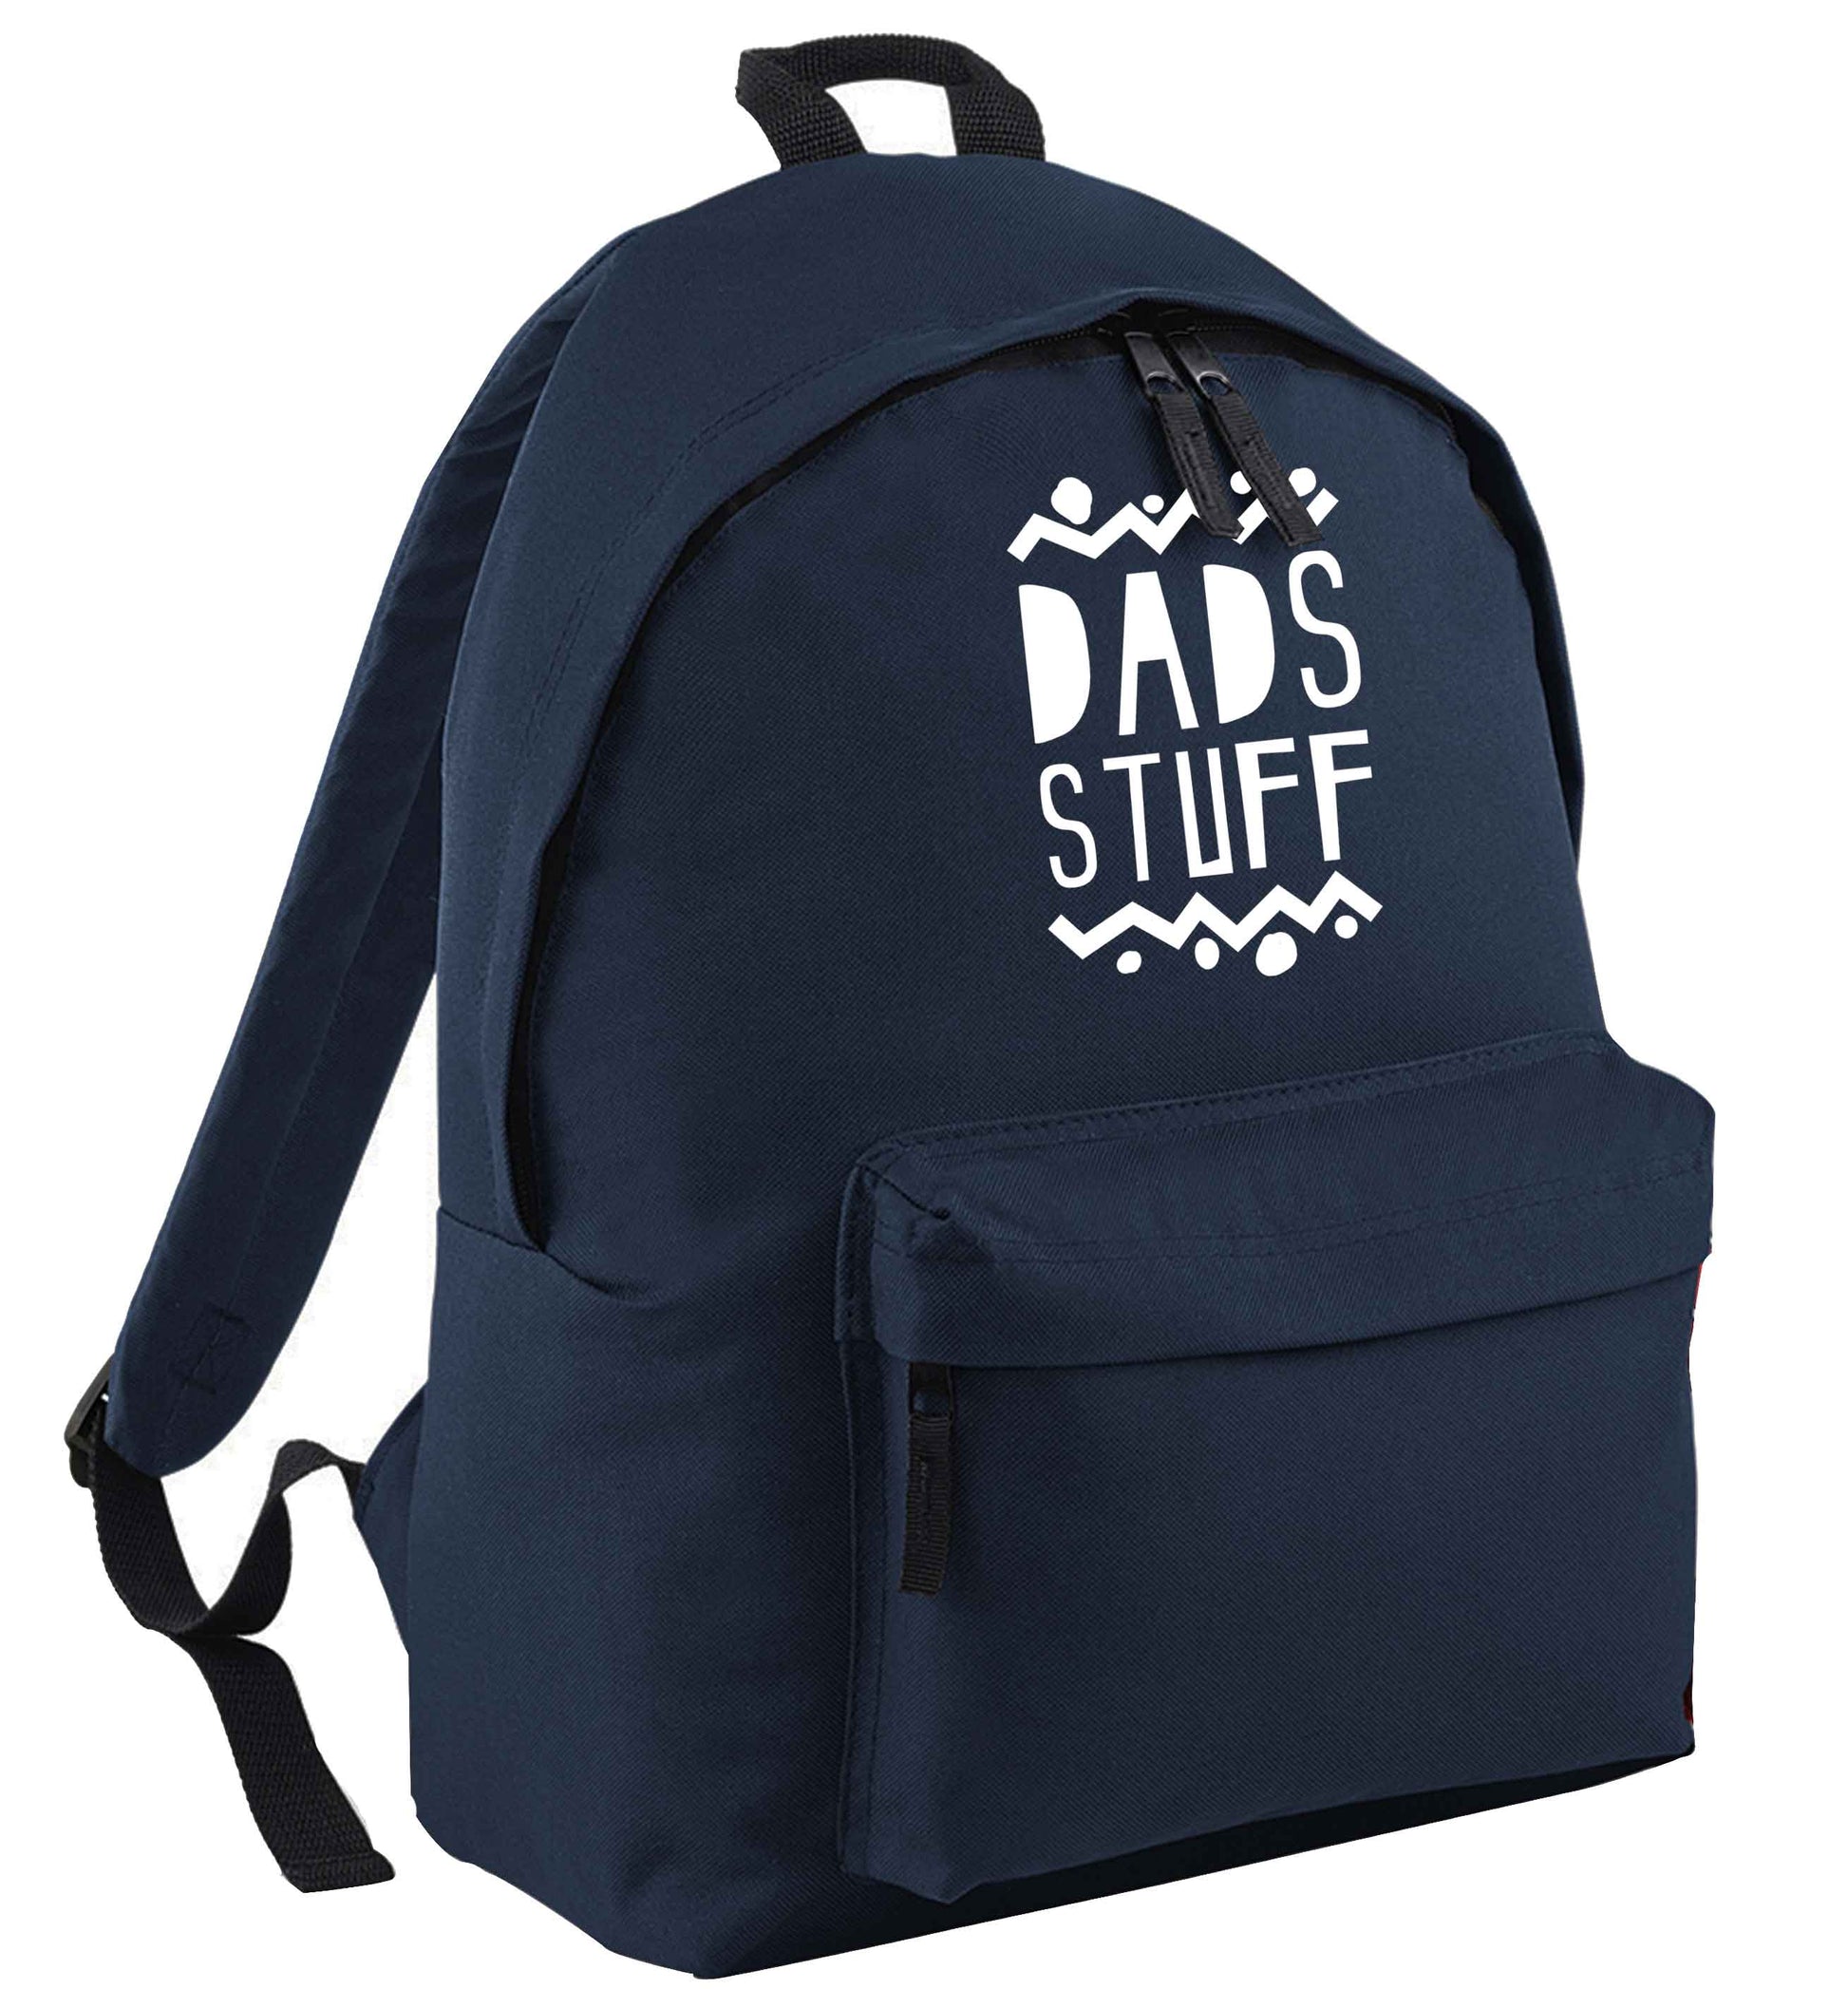 Dads stuff navy adults backpack